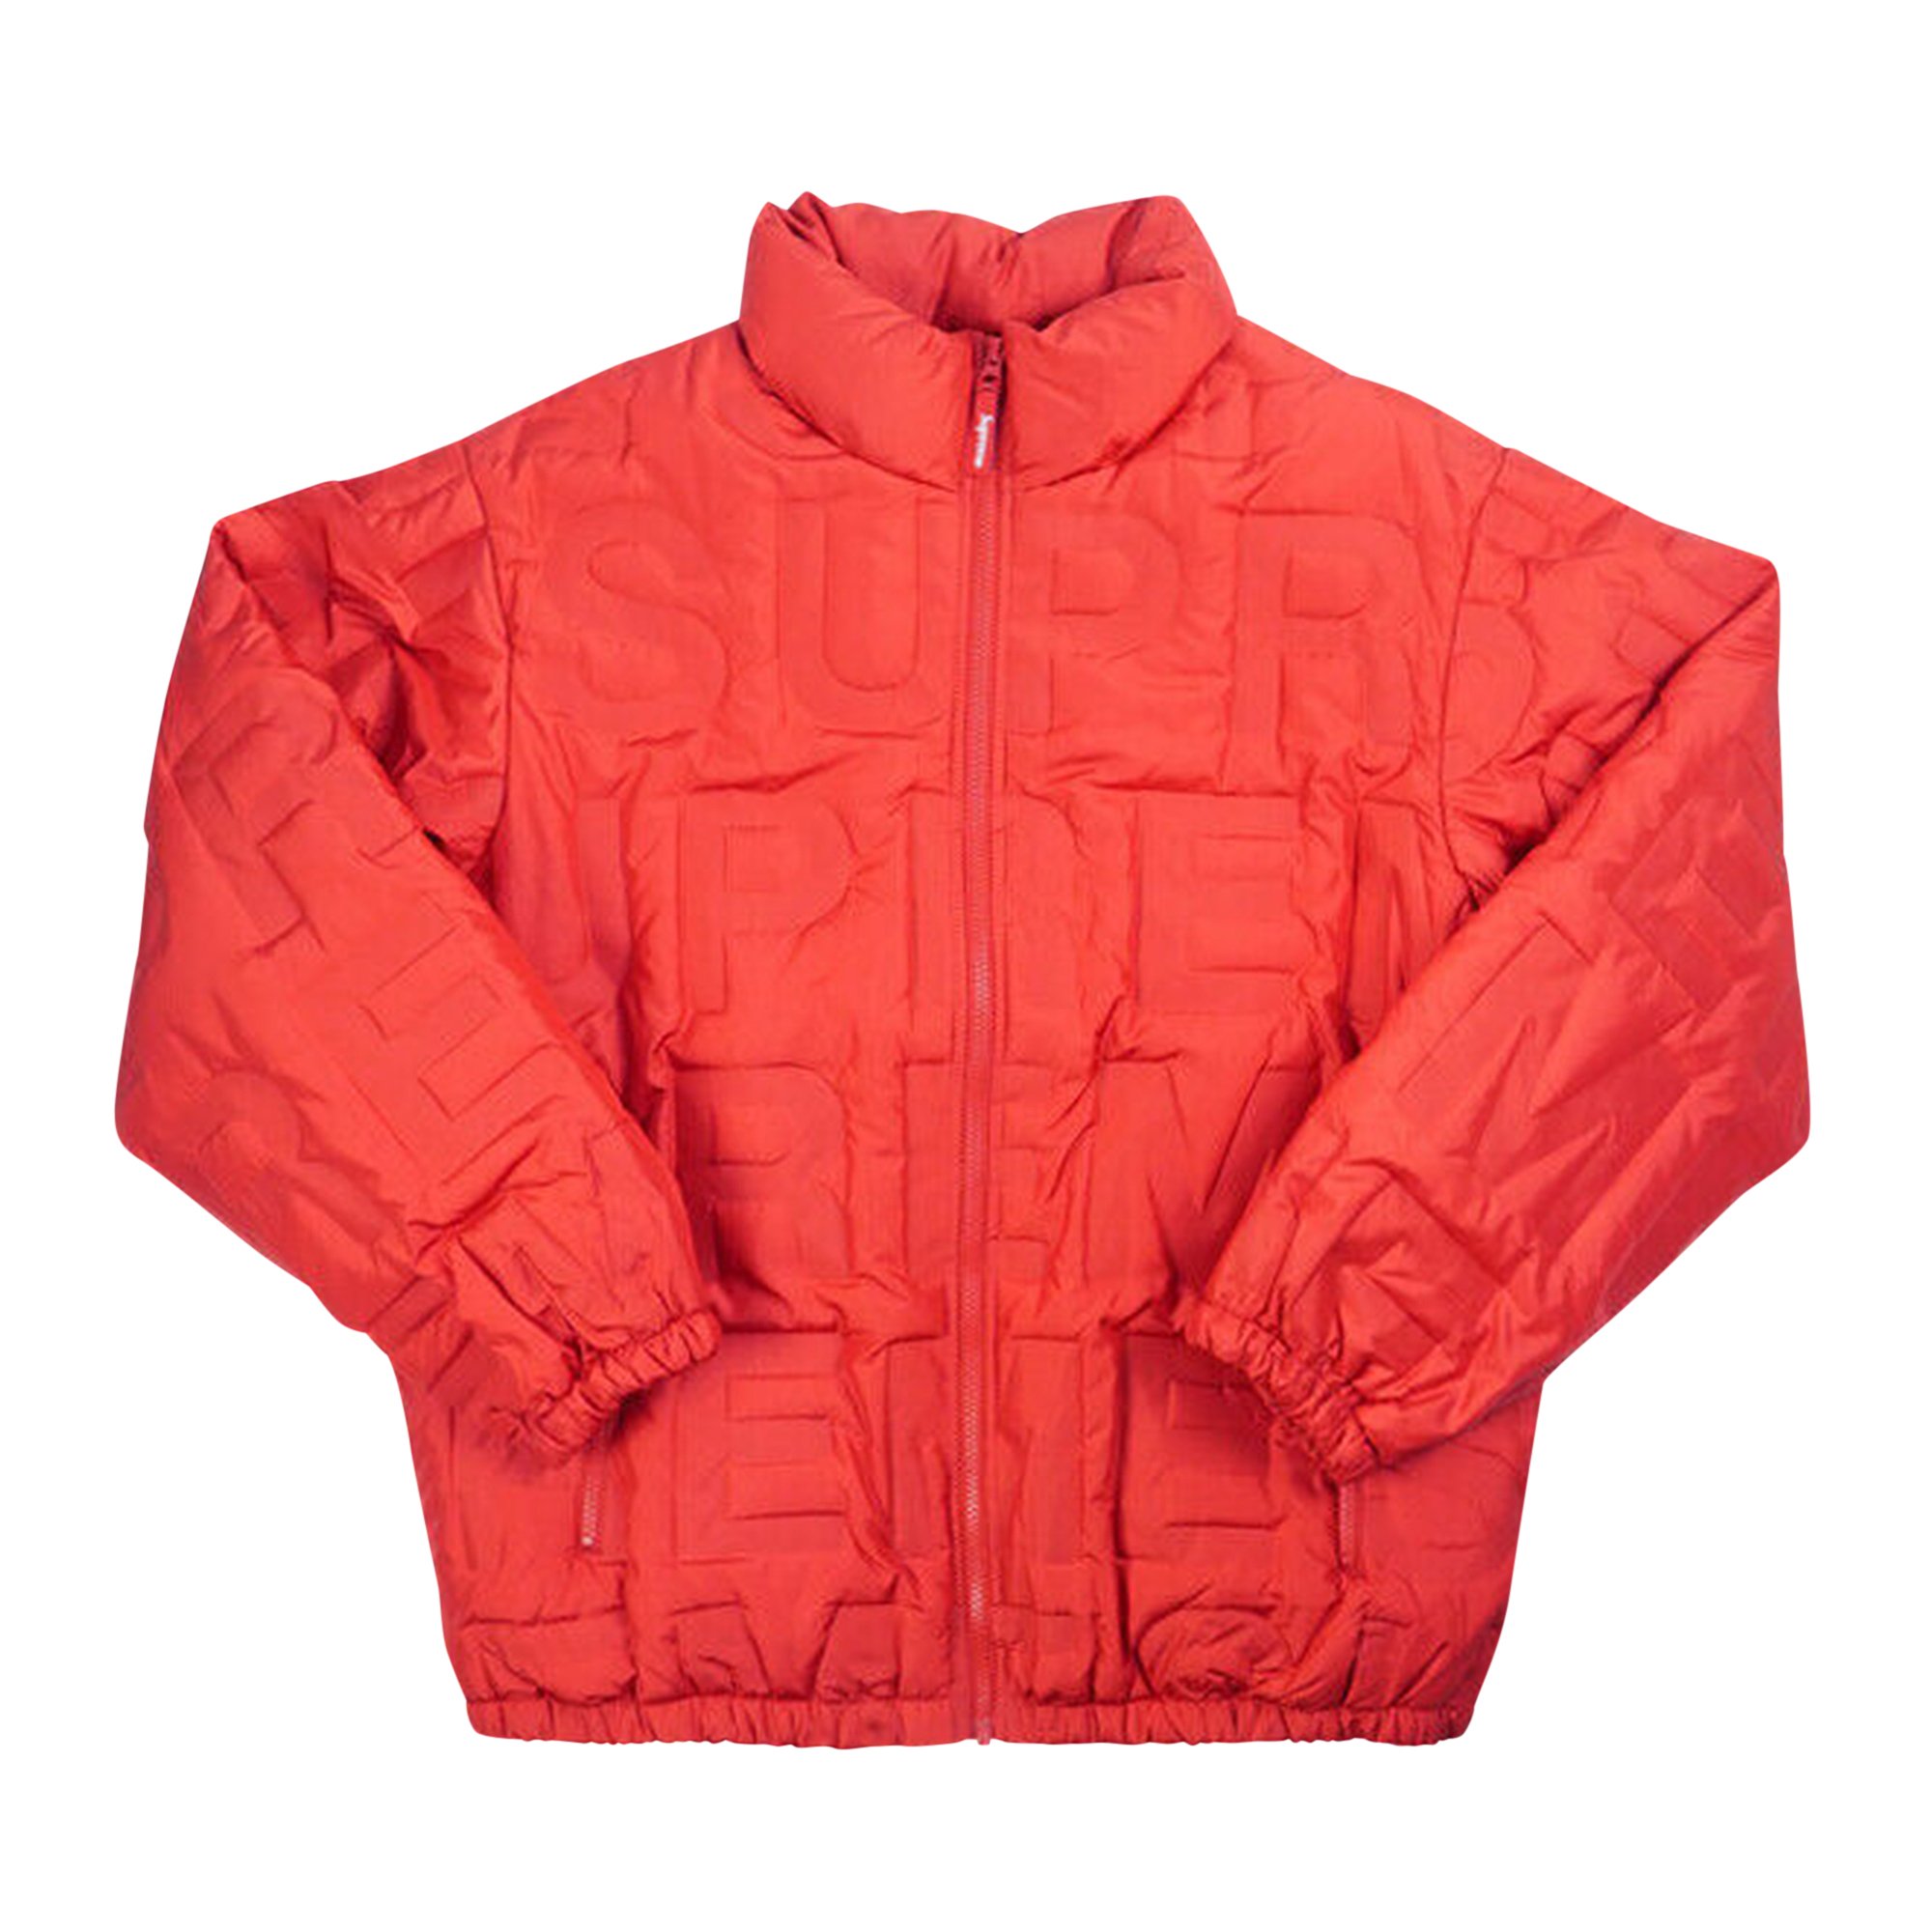 Buy Supreme Bonded Logo Puffy Jacket 'Red' - SS19J43 RED | GOAT